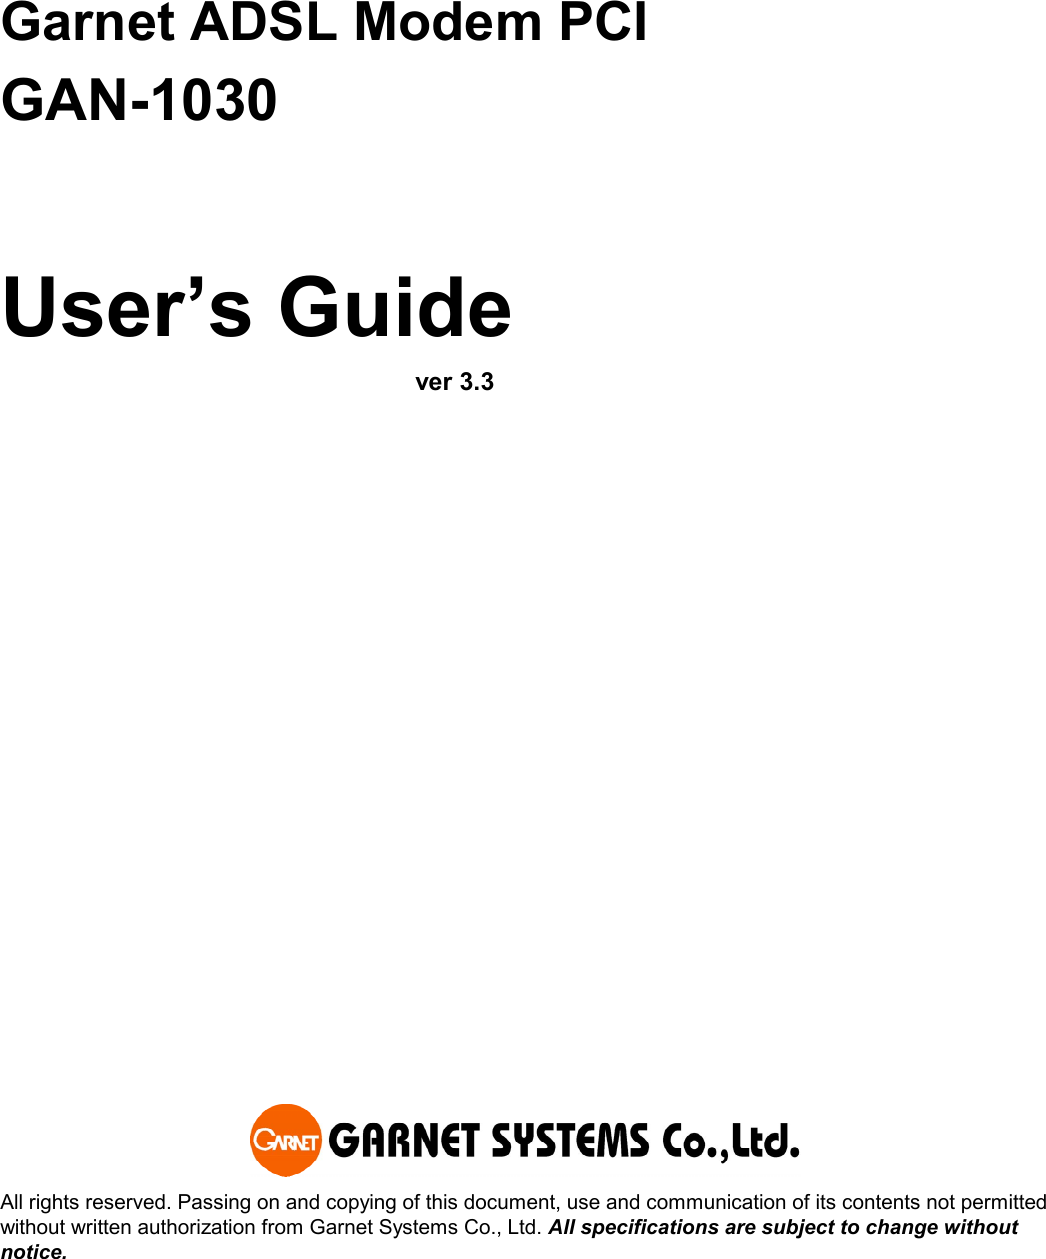    Garnet ADSL Modem PCI GAN-1030    User’s Guide                     ver 3.3               All rights reserved. Passing on and copying of this document, use and communication of its contents not permitted without written authorization from Garnet Systems Co., Ltd. All specifications are subject to change without notice. 